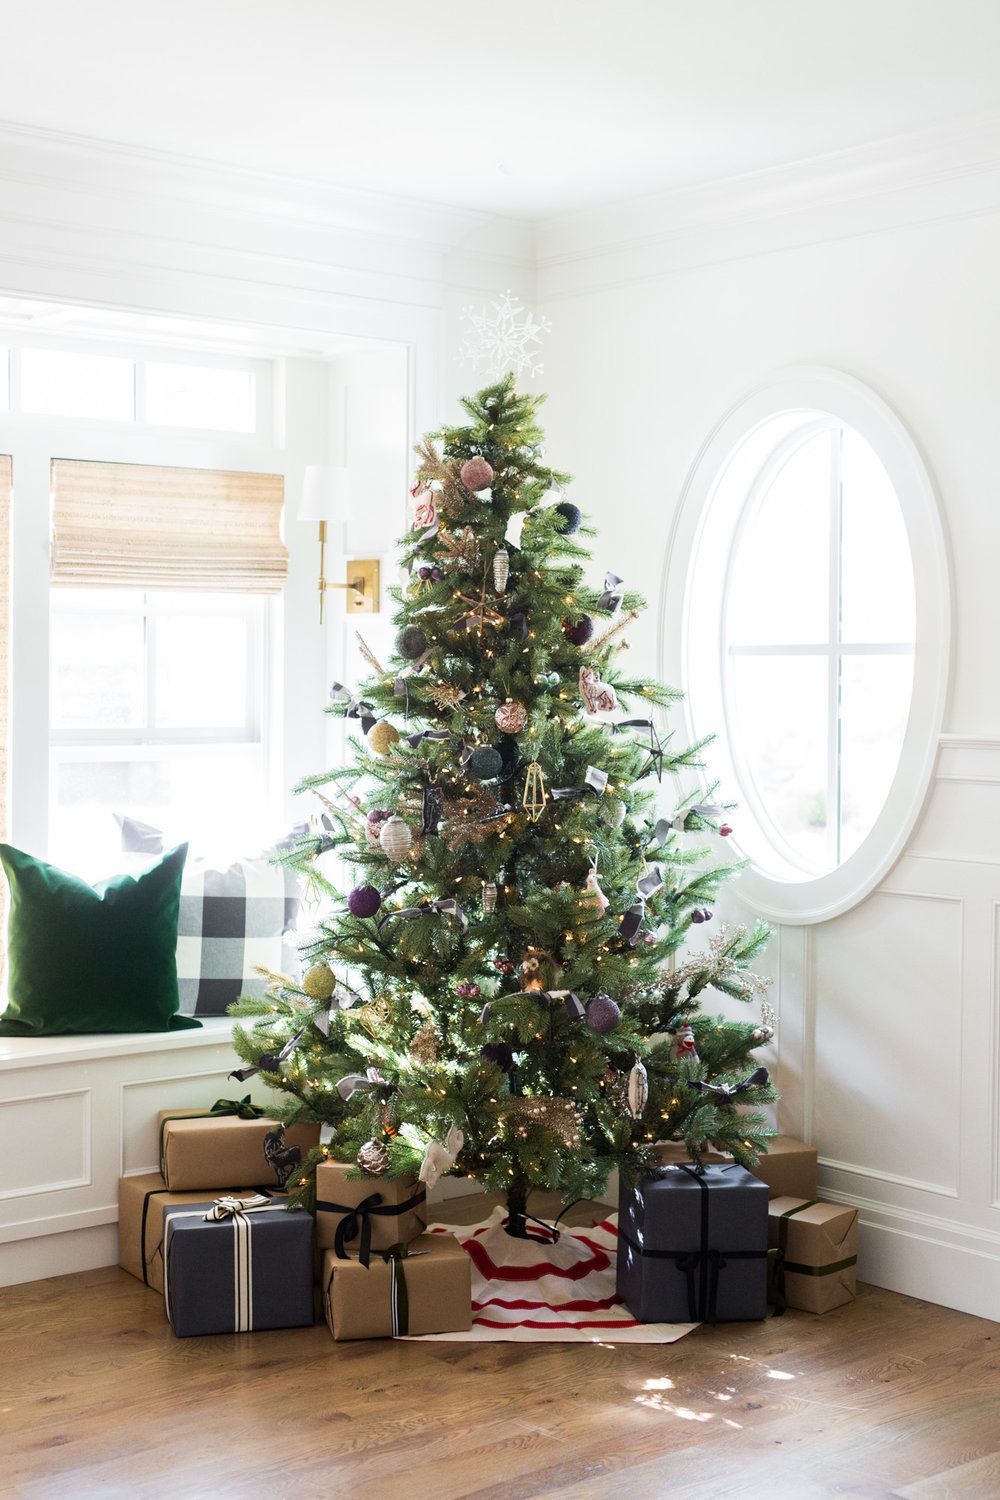 How We Decorate the Christmas Tree -   24 green christmas decor
 ideas